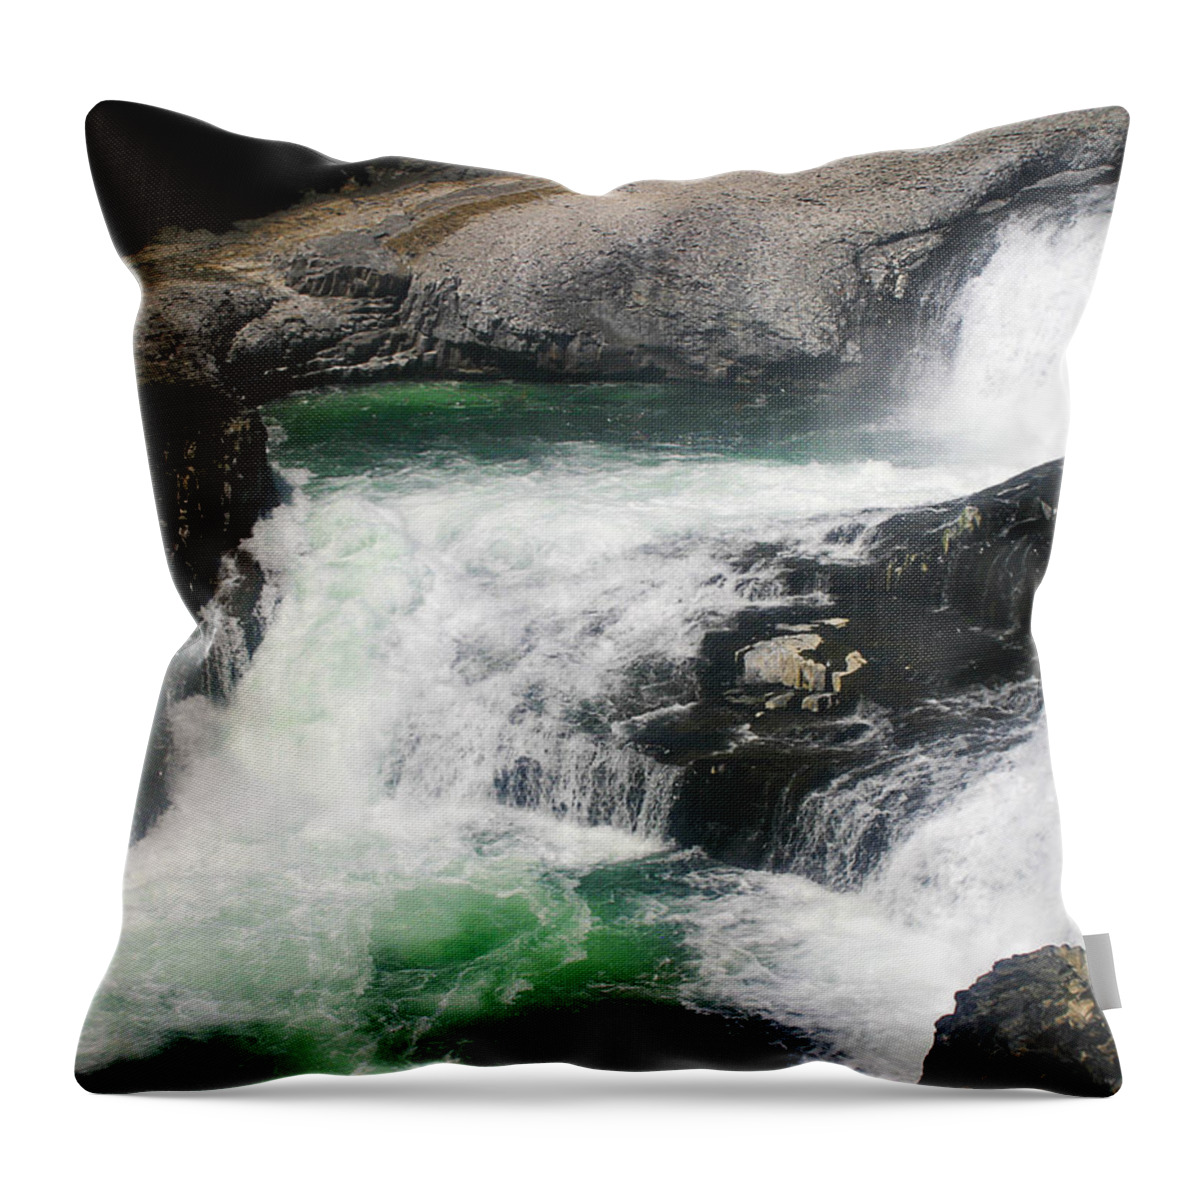 Spokane Throw Pillow featuring the photograph Spokane Water Fall by Anthony Jones